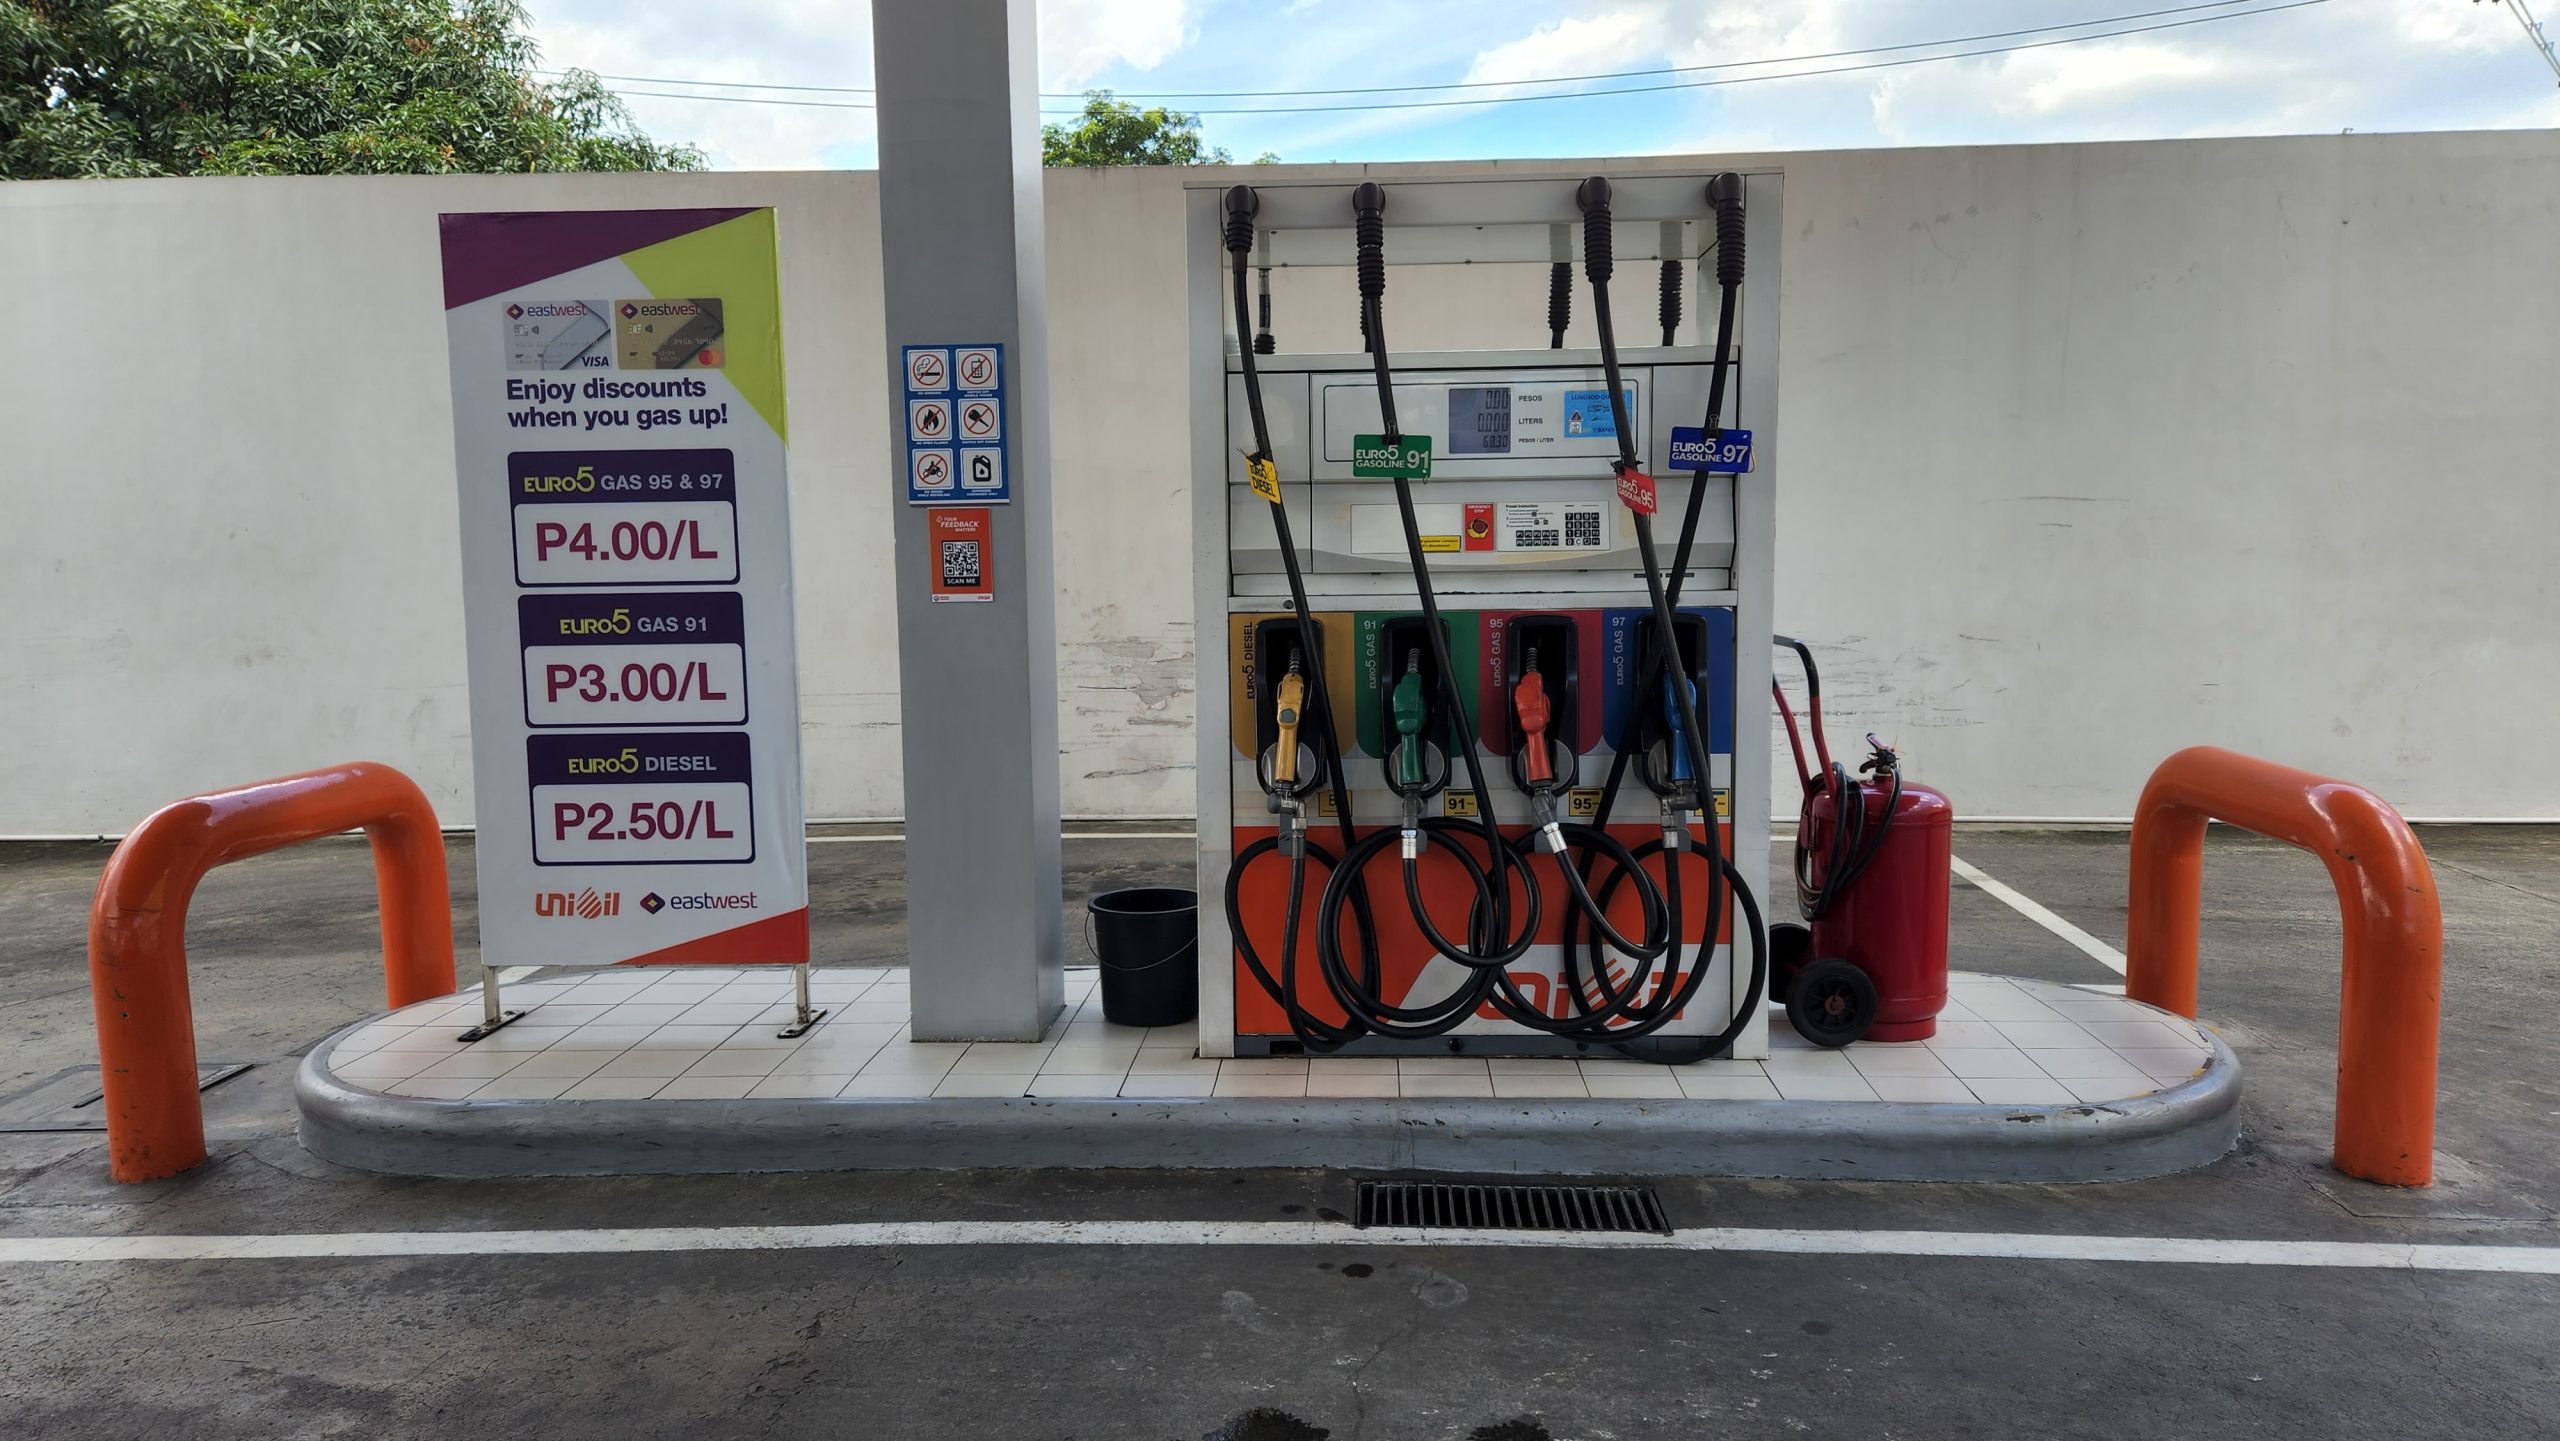 Fuel price rollback confirmed for tomorrow September 6: Diesel to go down PHP 1.55/L and Gasoline by PHP 2.60/L